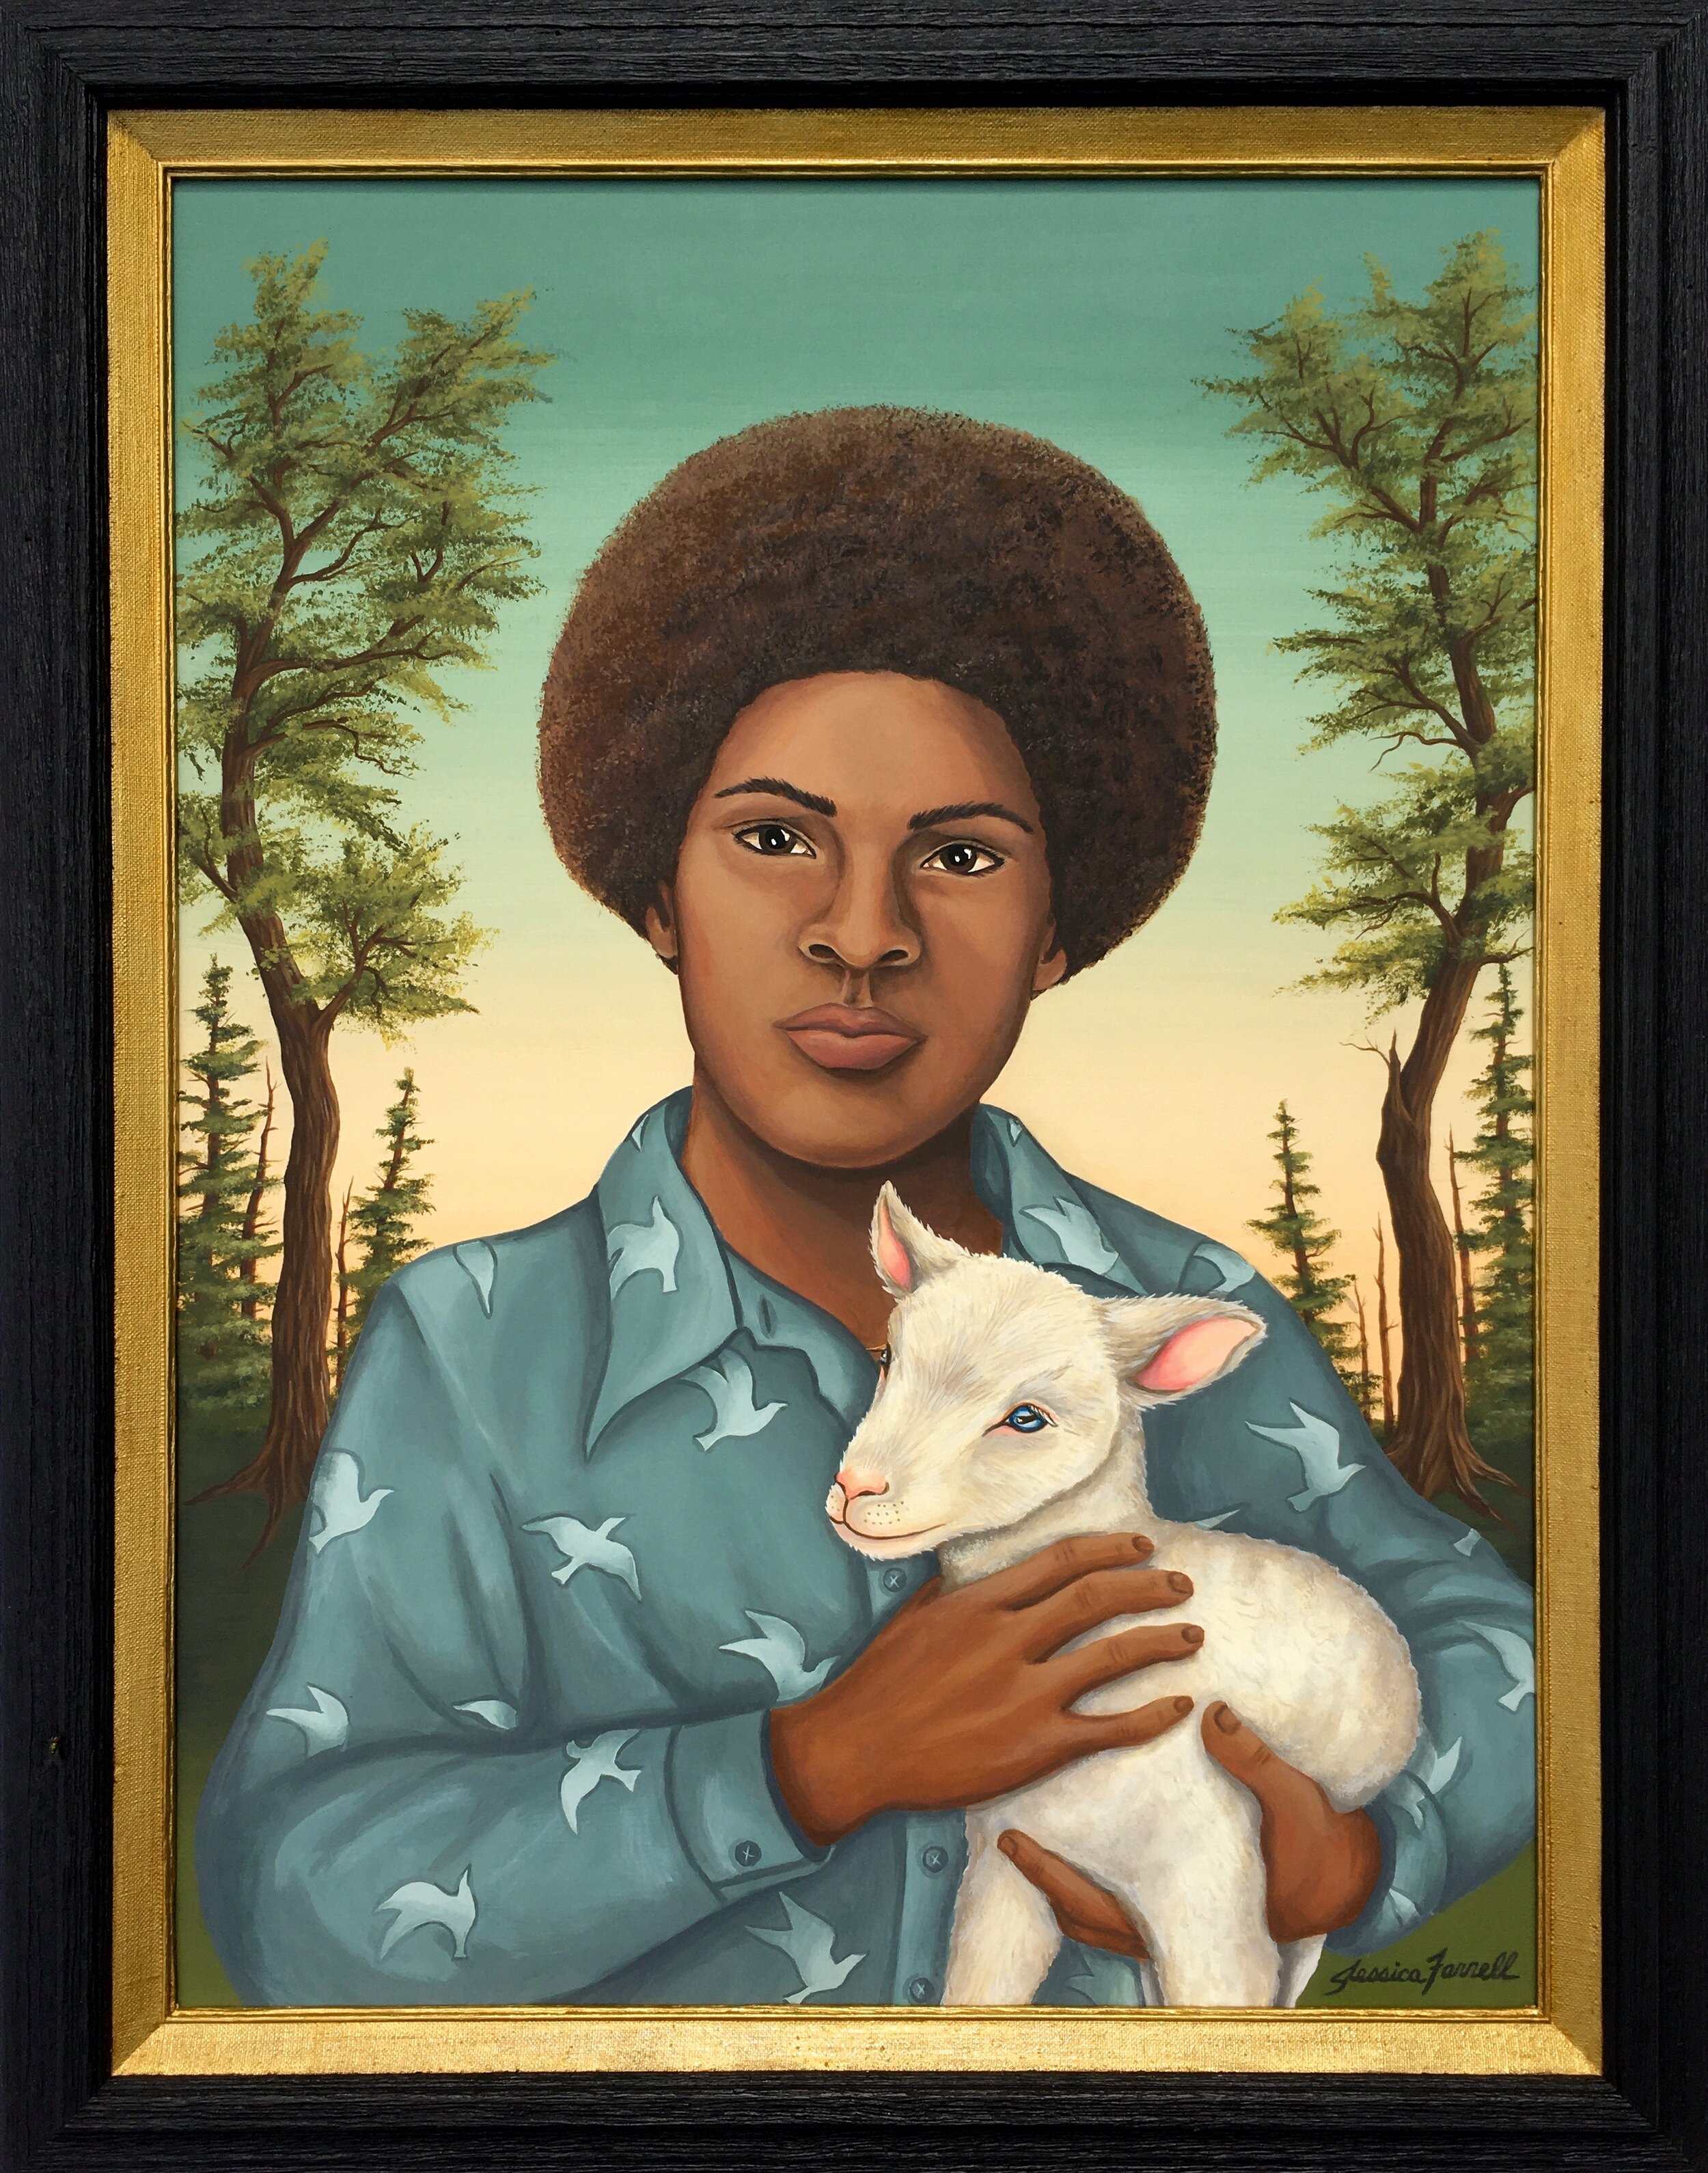   Dennis &amp; Lamb , 2020  Acrylic on wood  24 x 18 inches (unframed)  28 1/4 x 22 1/4 inches (framed) 